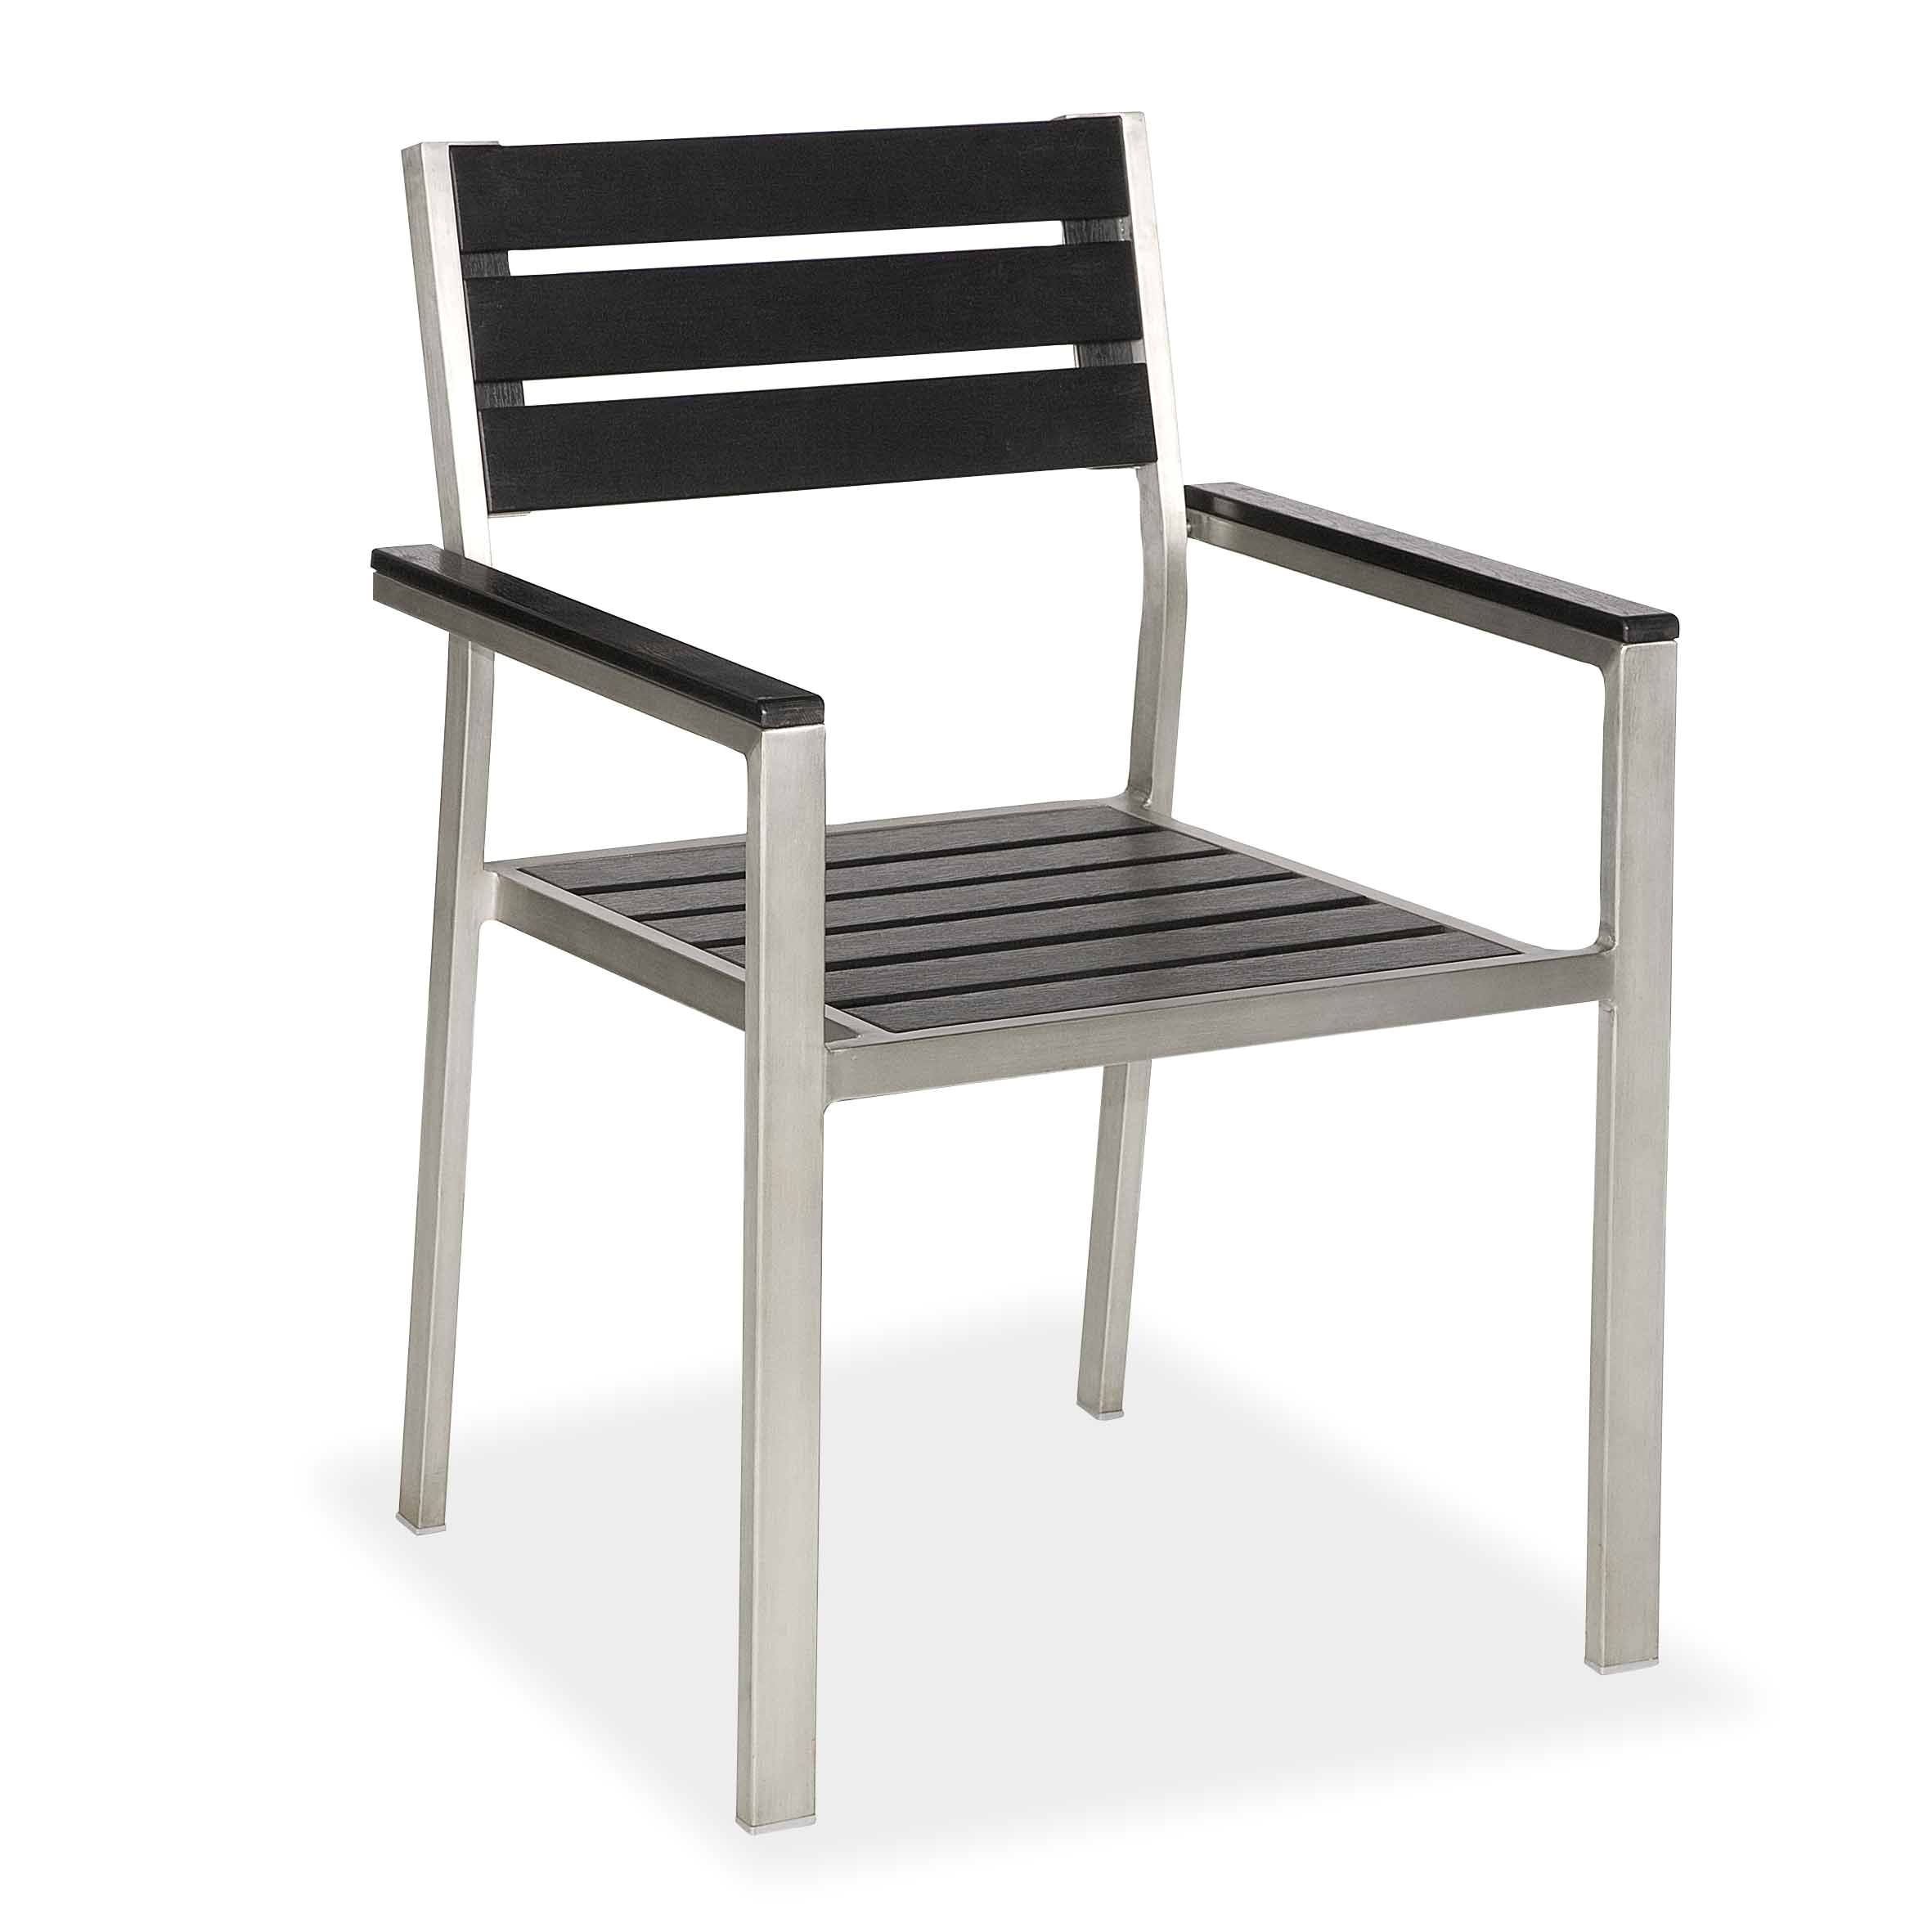 Lifetime Hard Plastic Chairs Ch C051 Stainless Steel Frame Plastic Wood top Outdoor Chair